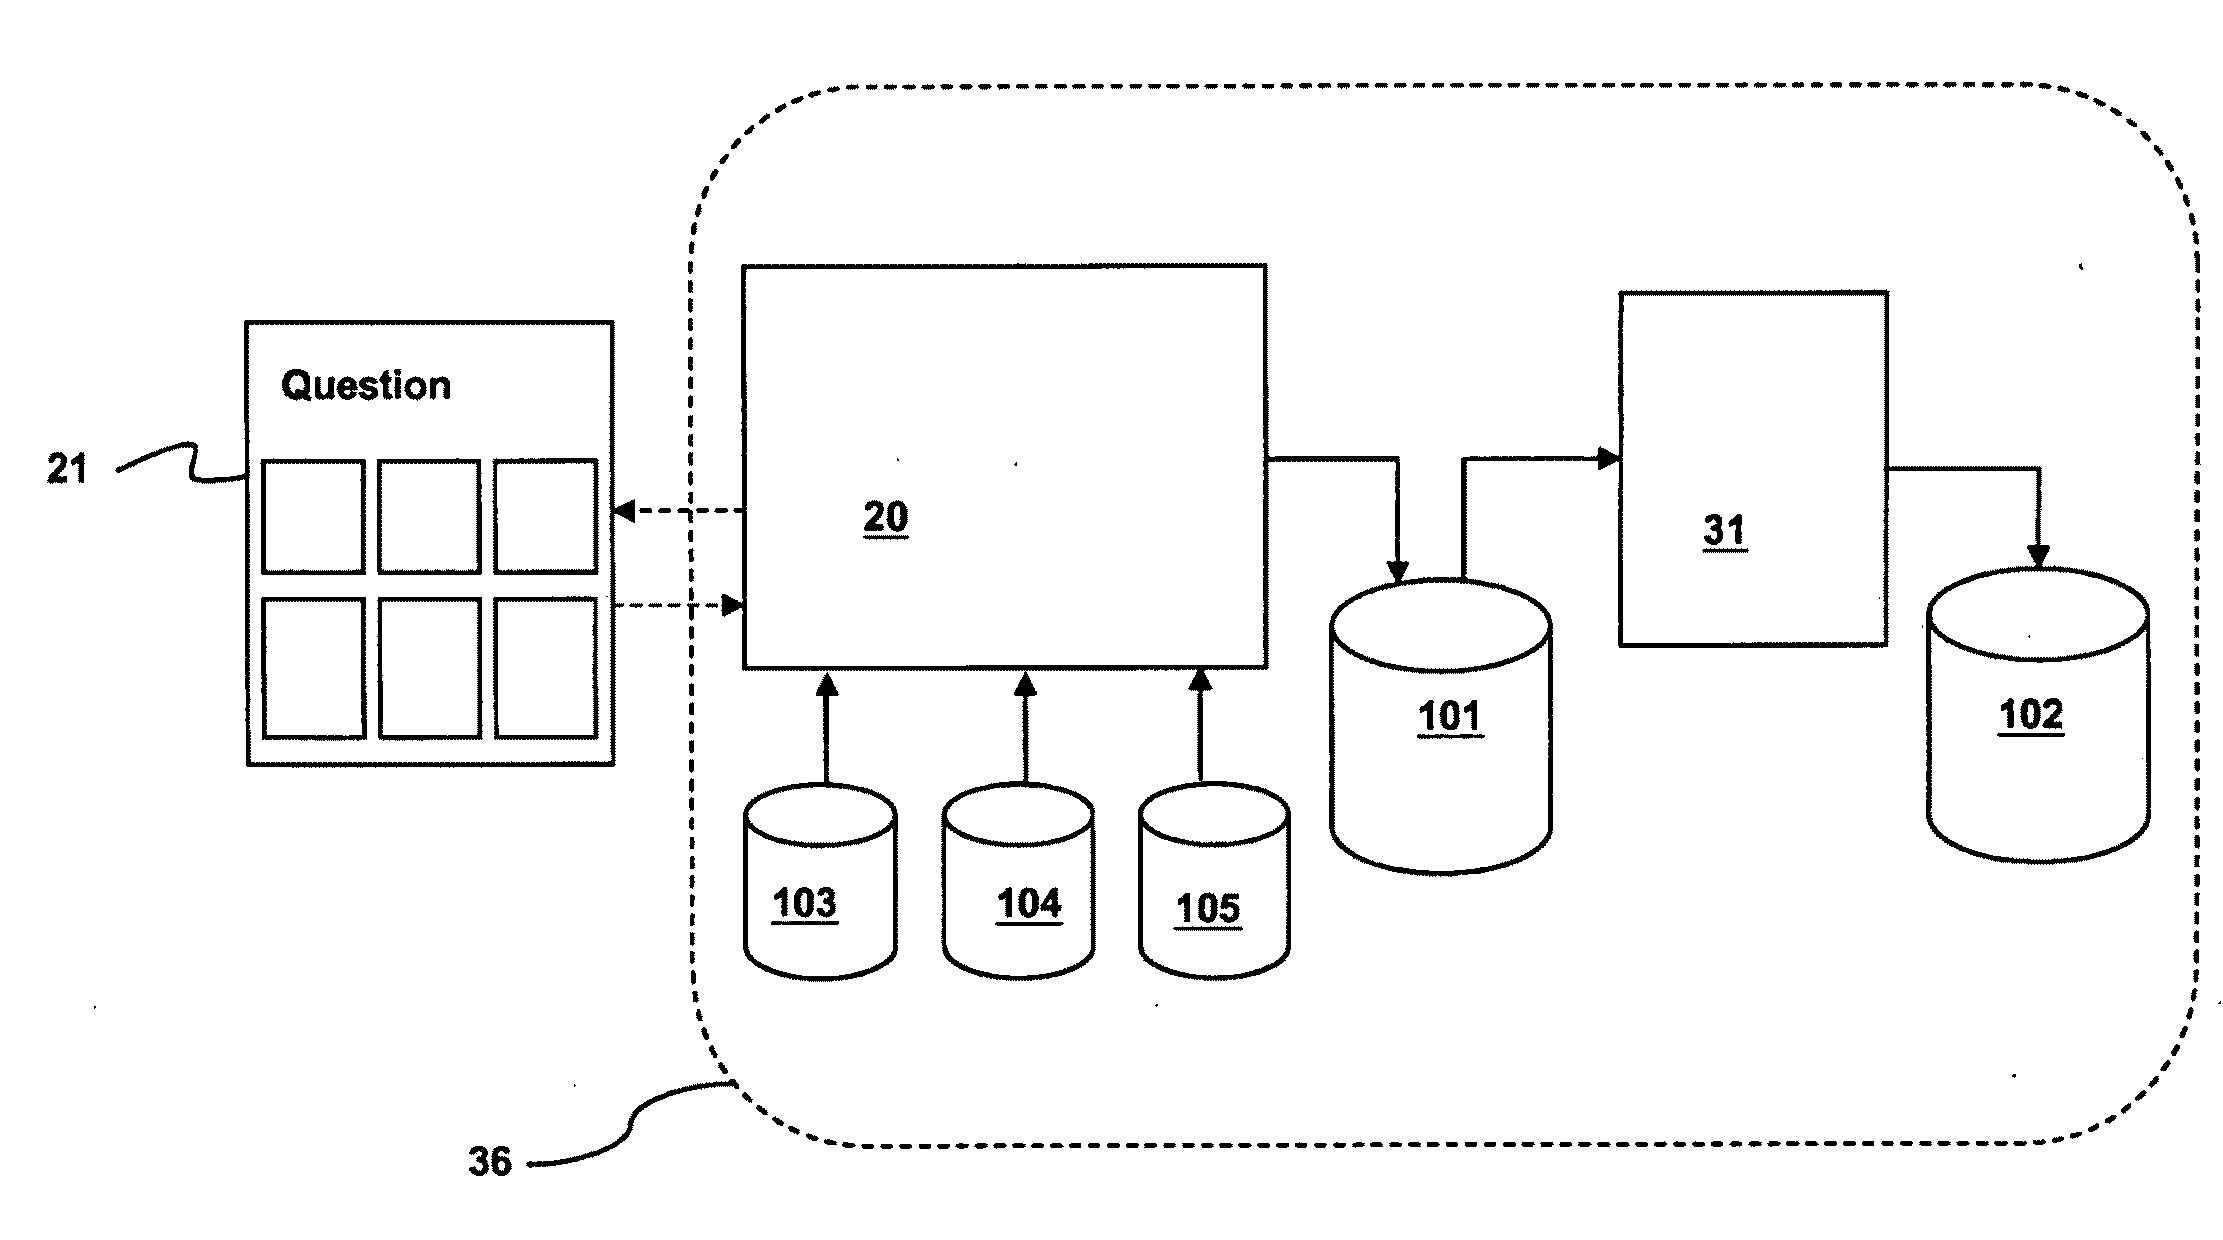 System and Method of Segmenting and Tagging Entities based on Profile Matching Using a Multi-Media Survey